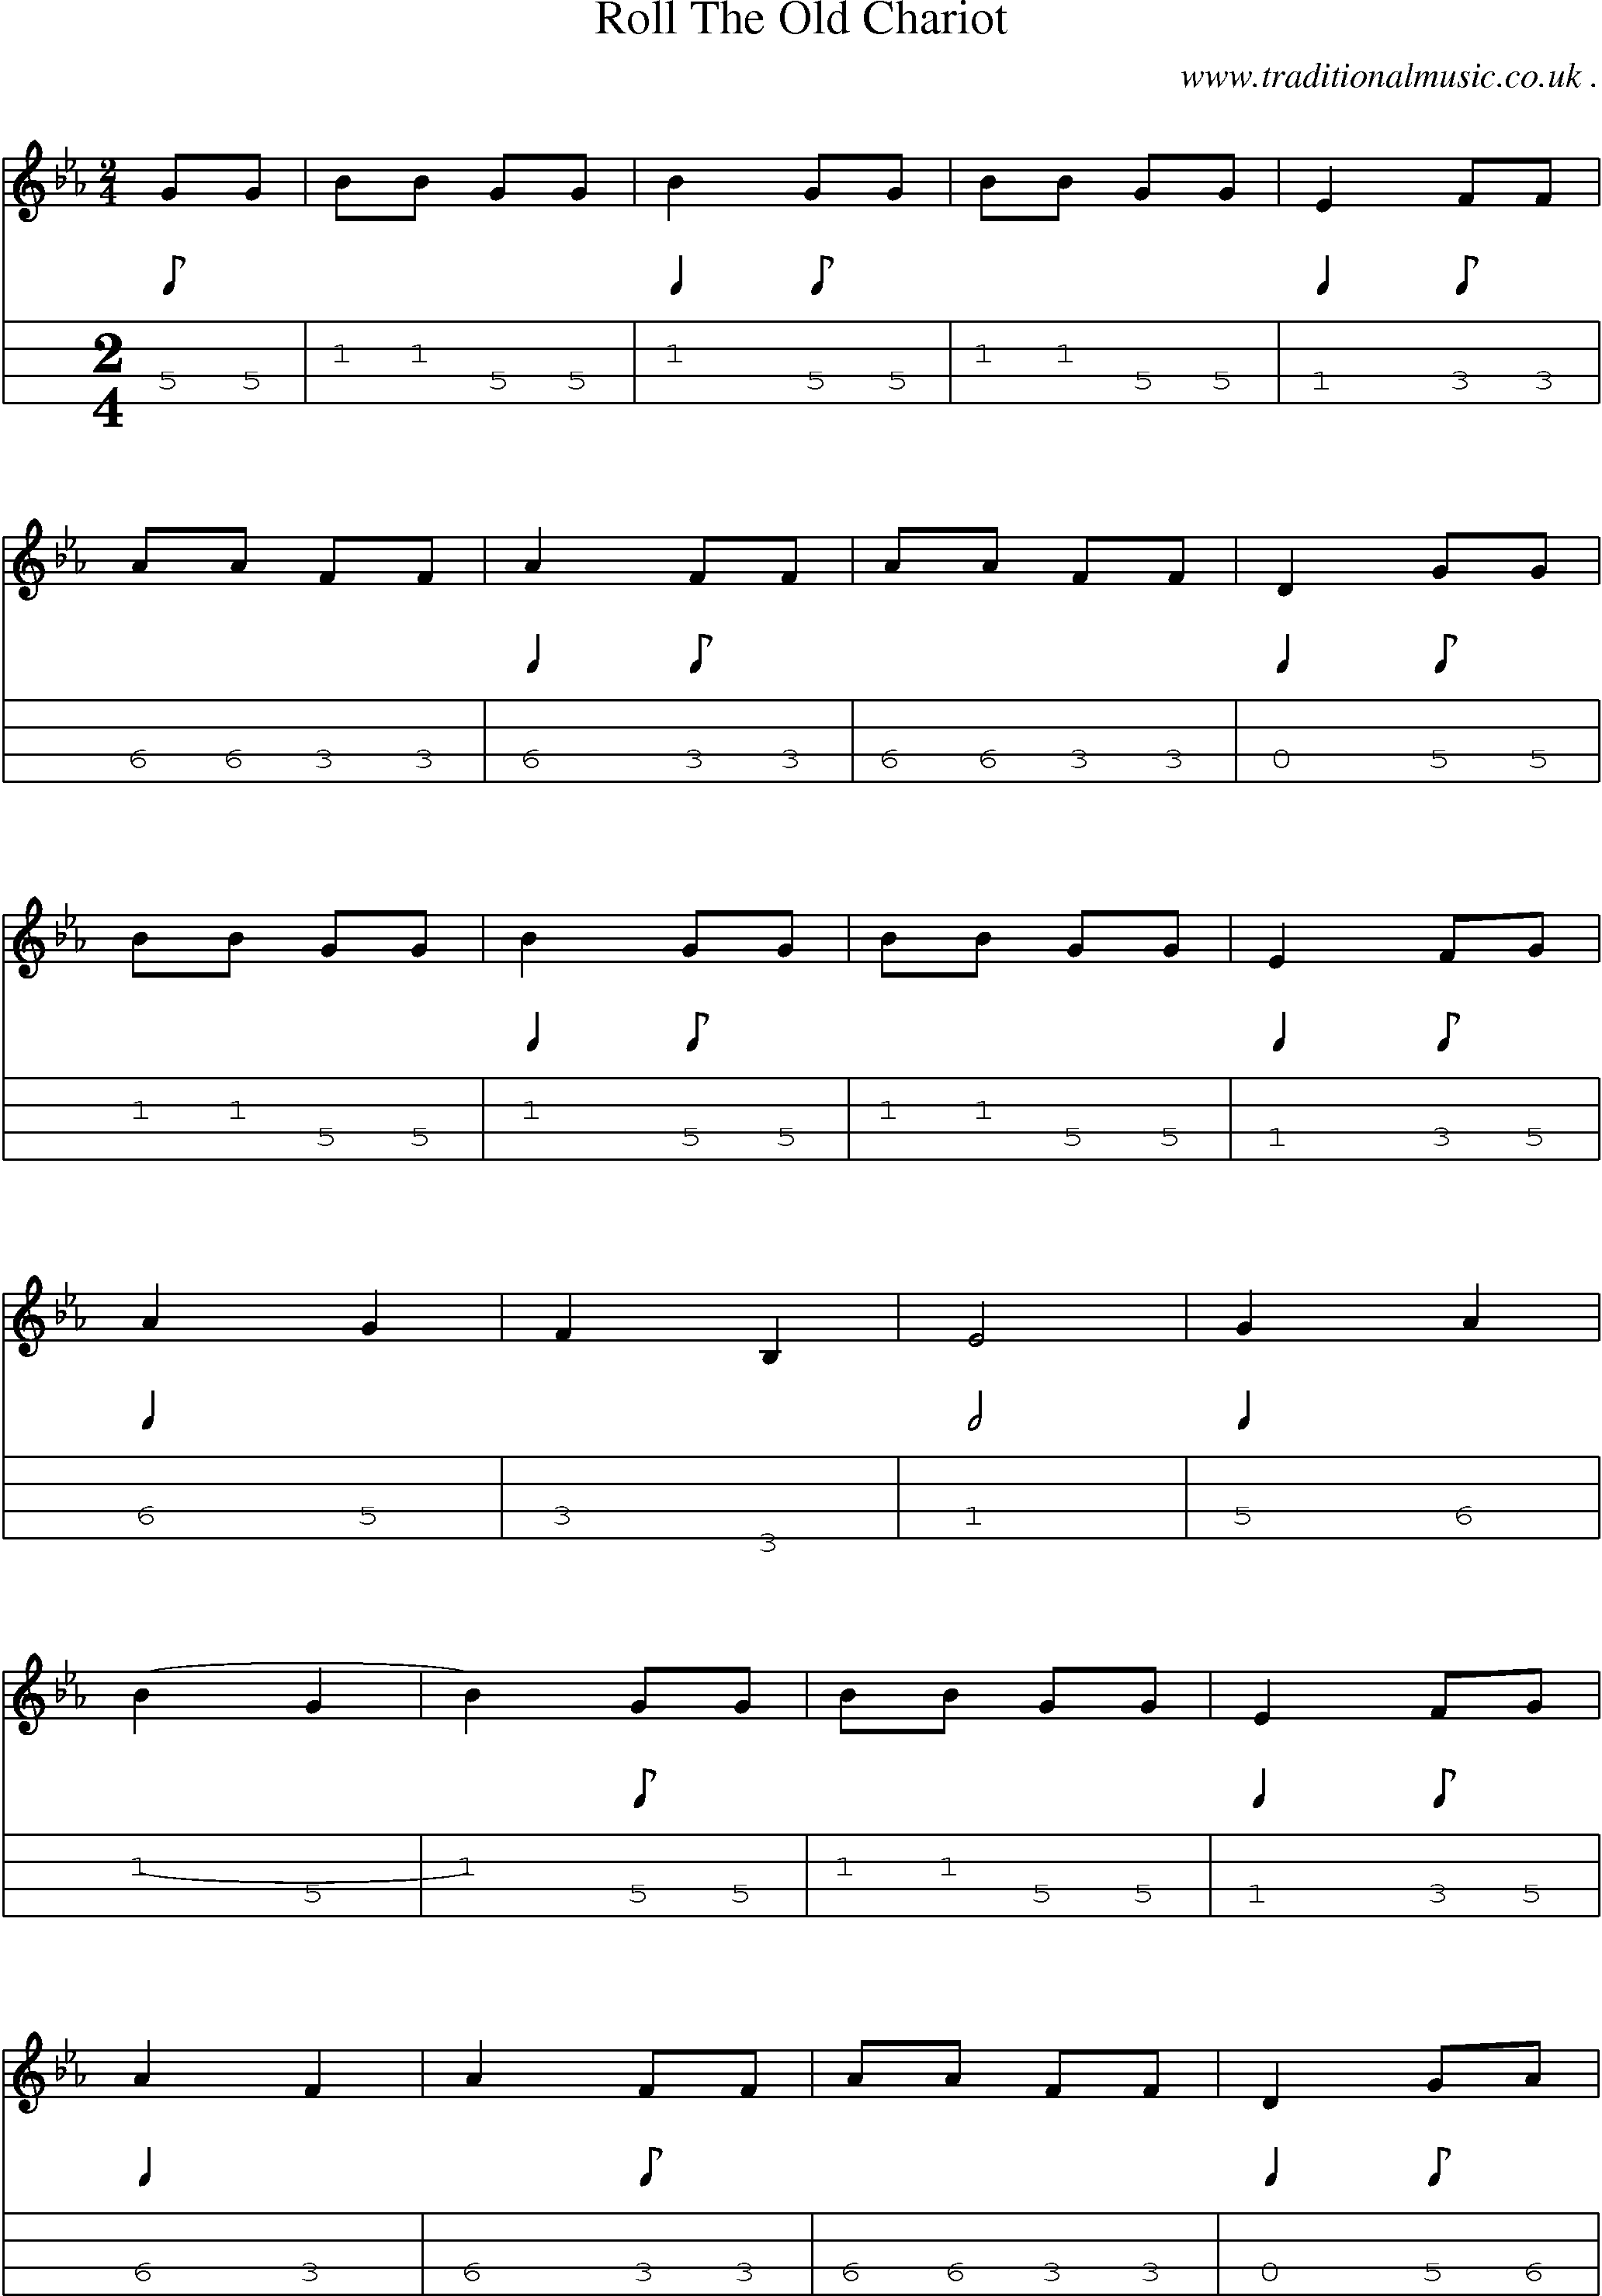 Sheet-Music and Mandolin Tabs for Roll The Old Chariot